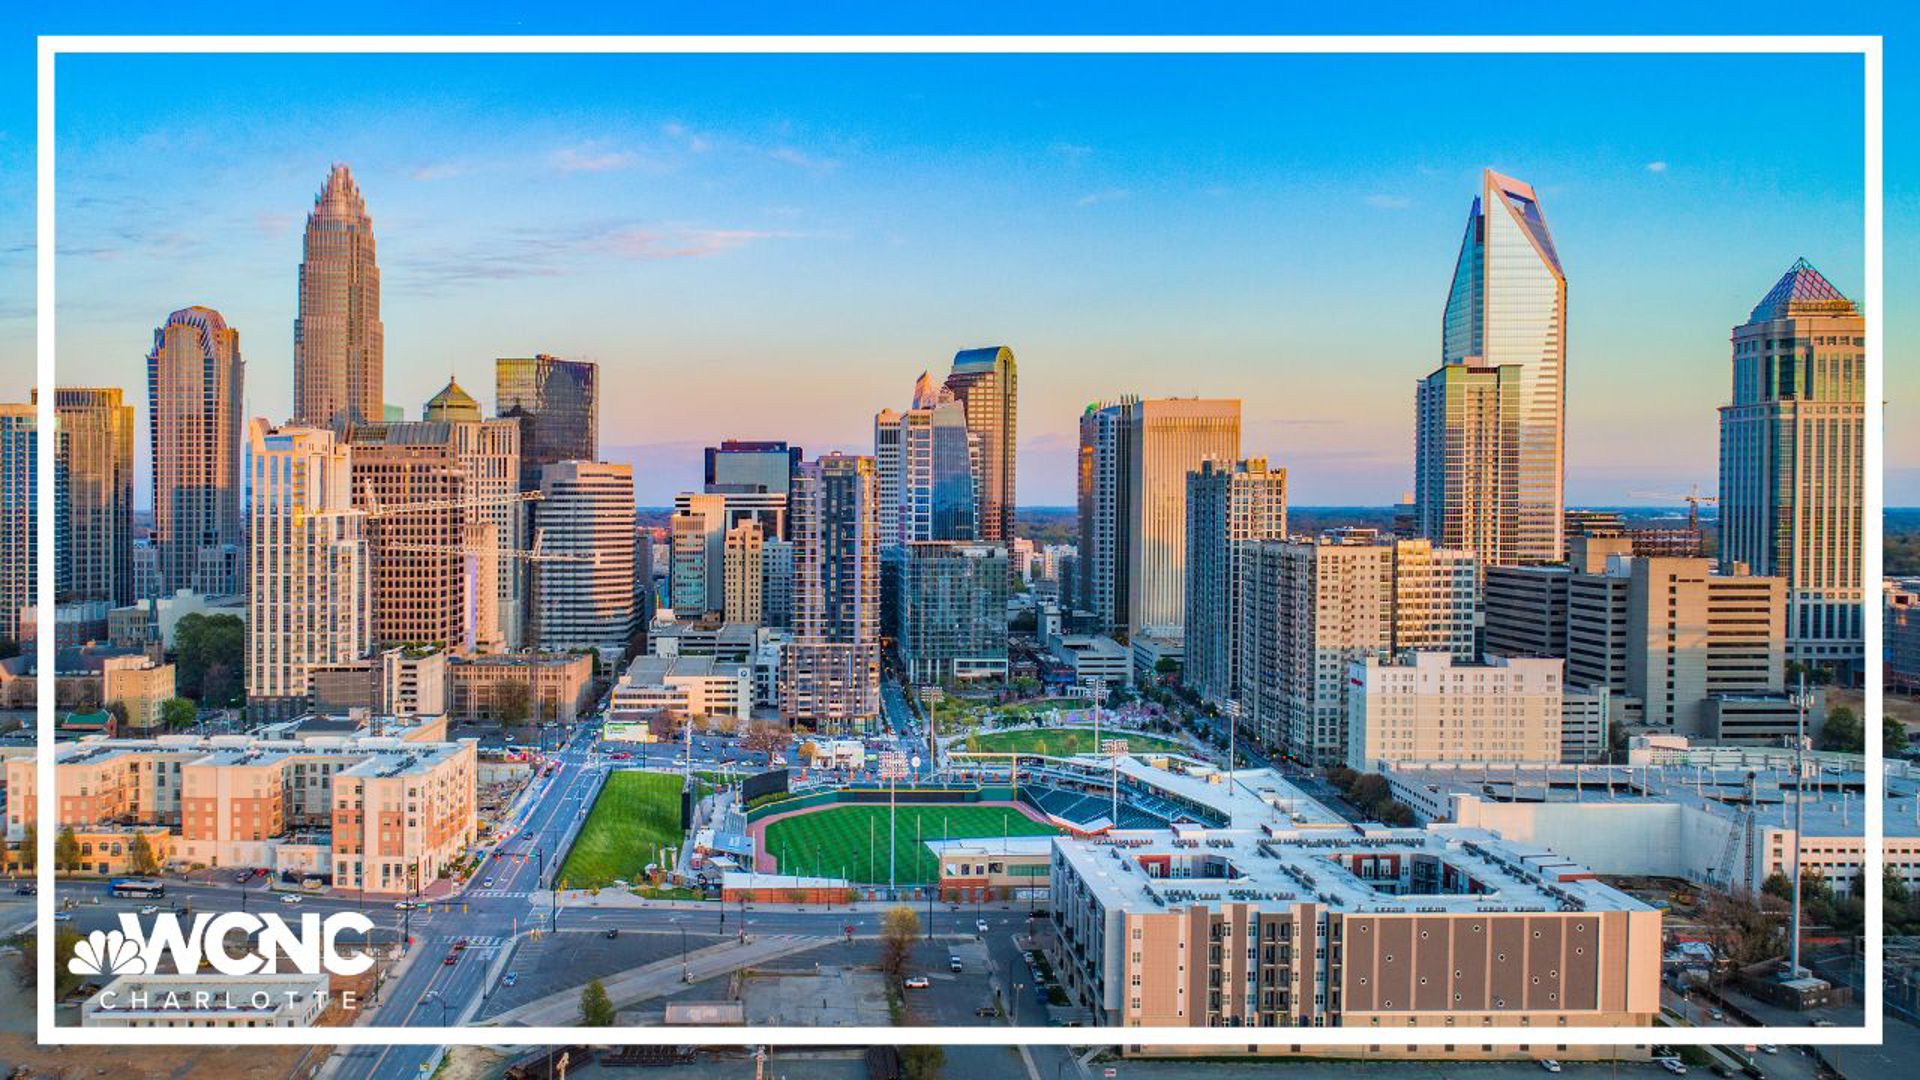 The Queen City was recently ranked in the top 5 best places to live in the U.S. thanks to its diverse neighborhoods and strong jobs market.